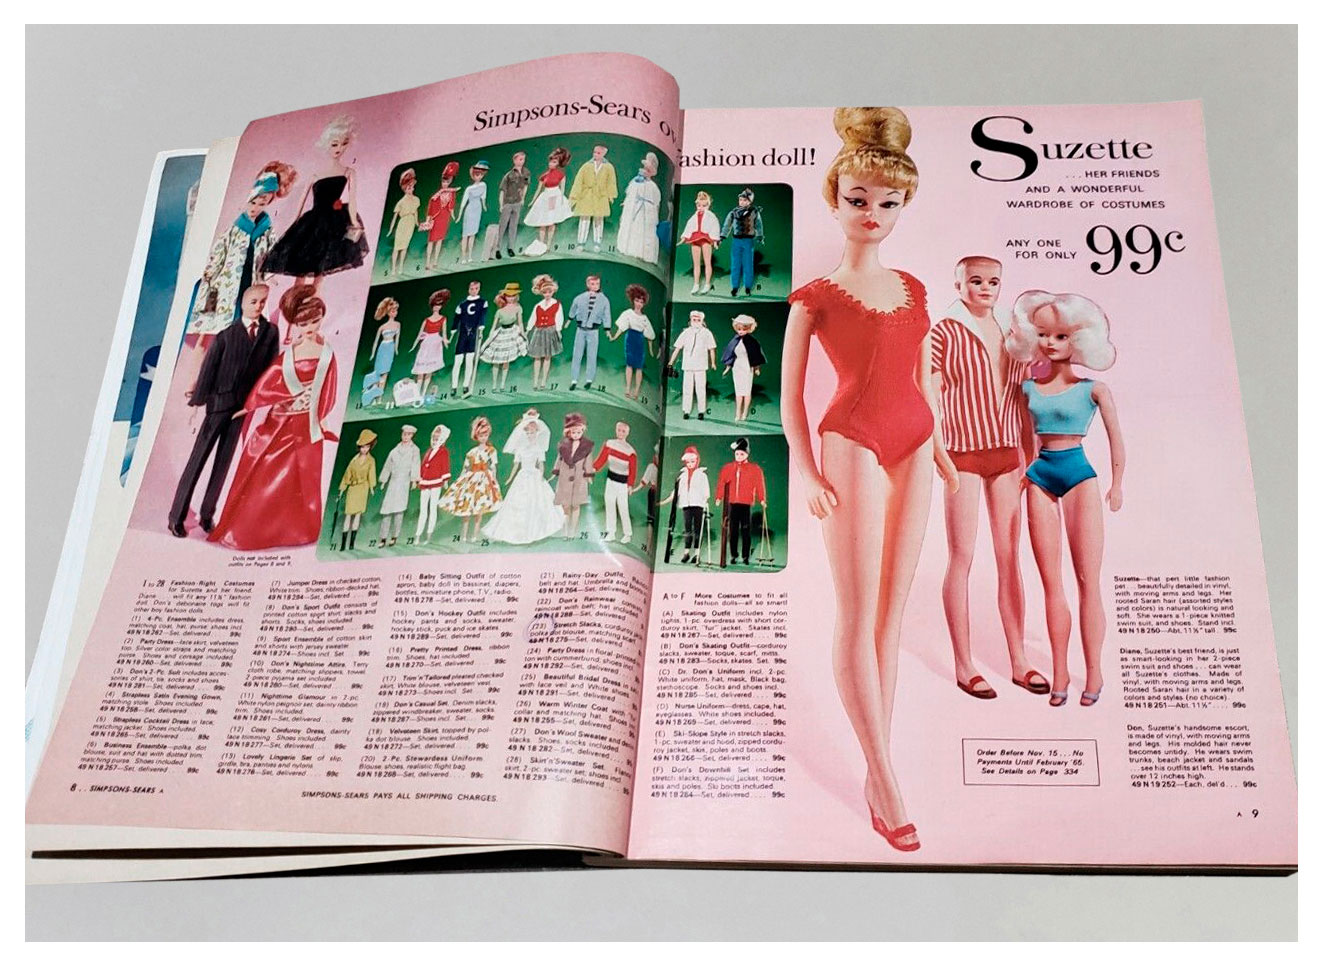 From 1964 Canadian Simpsons Sears Christmas catalogue